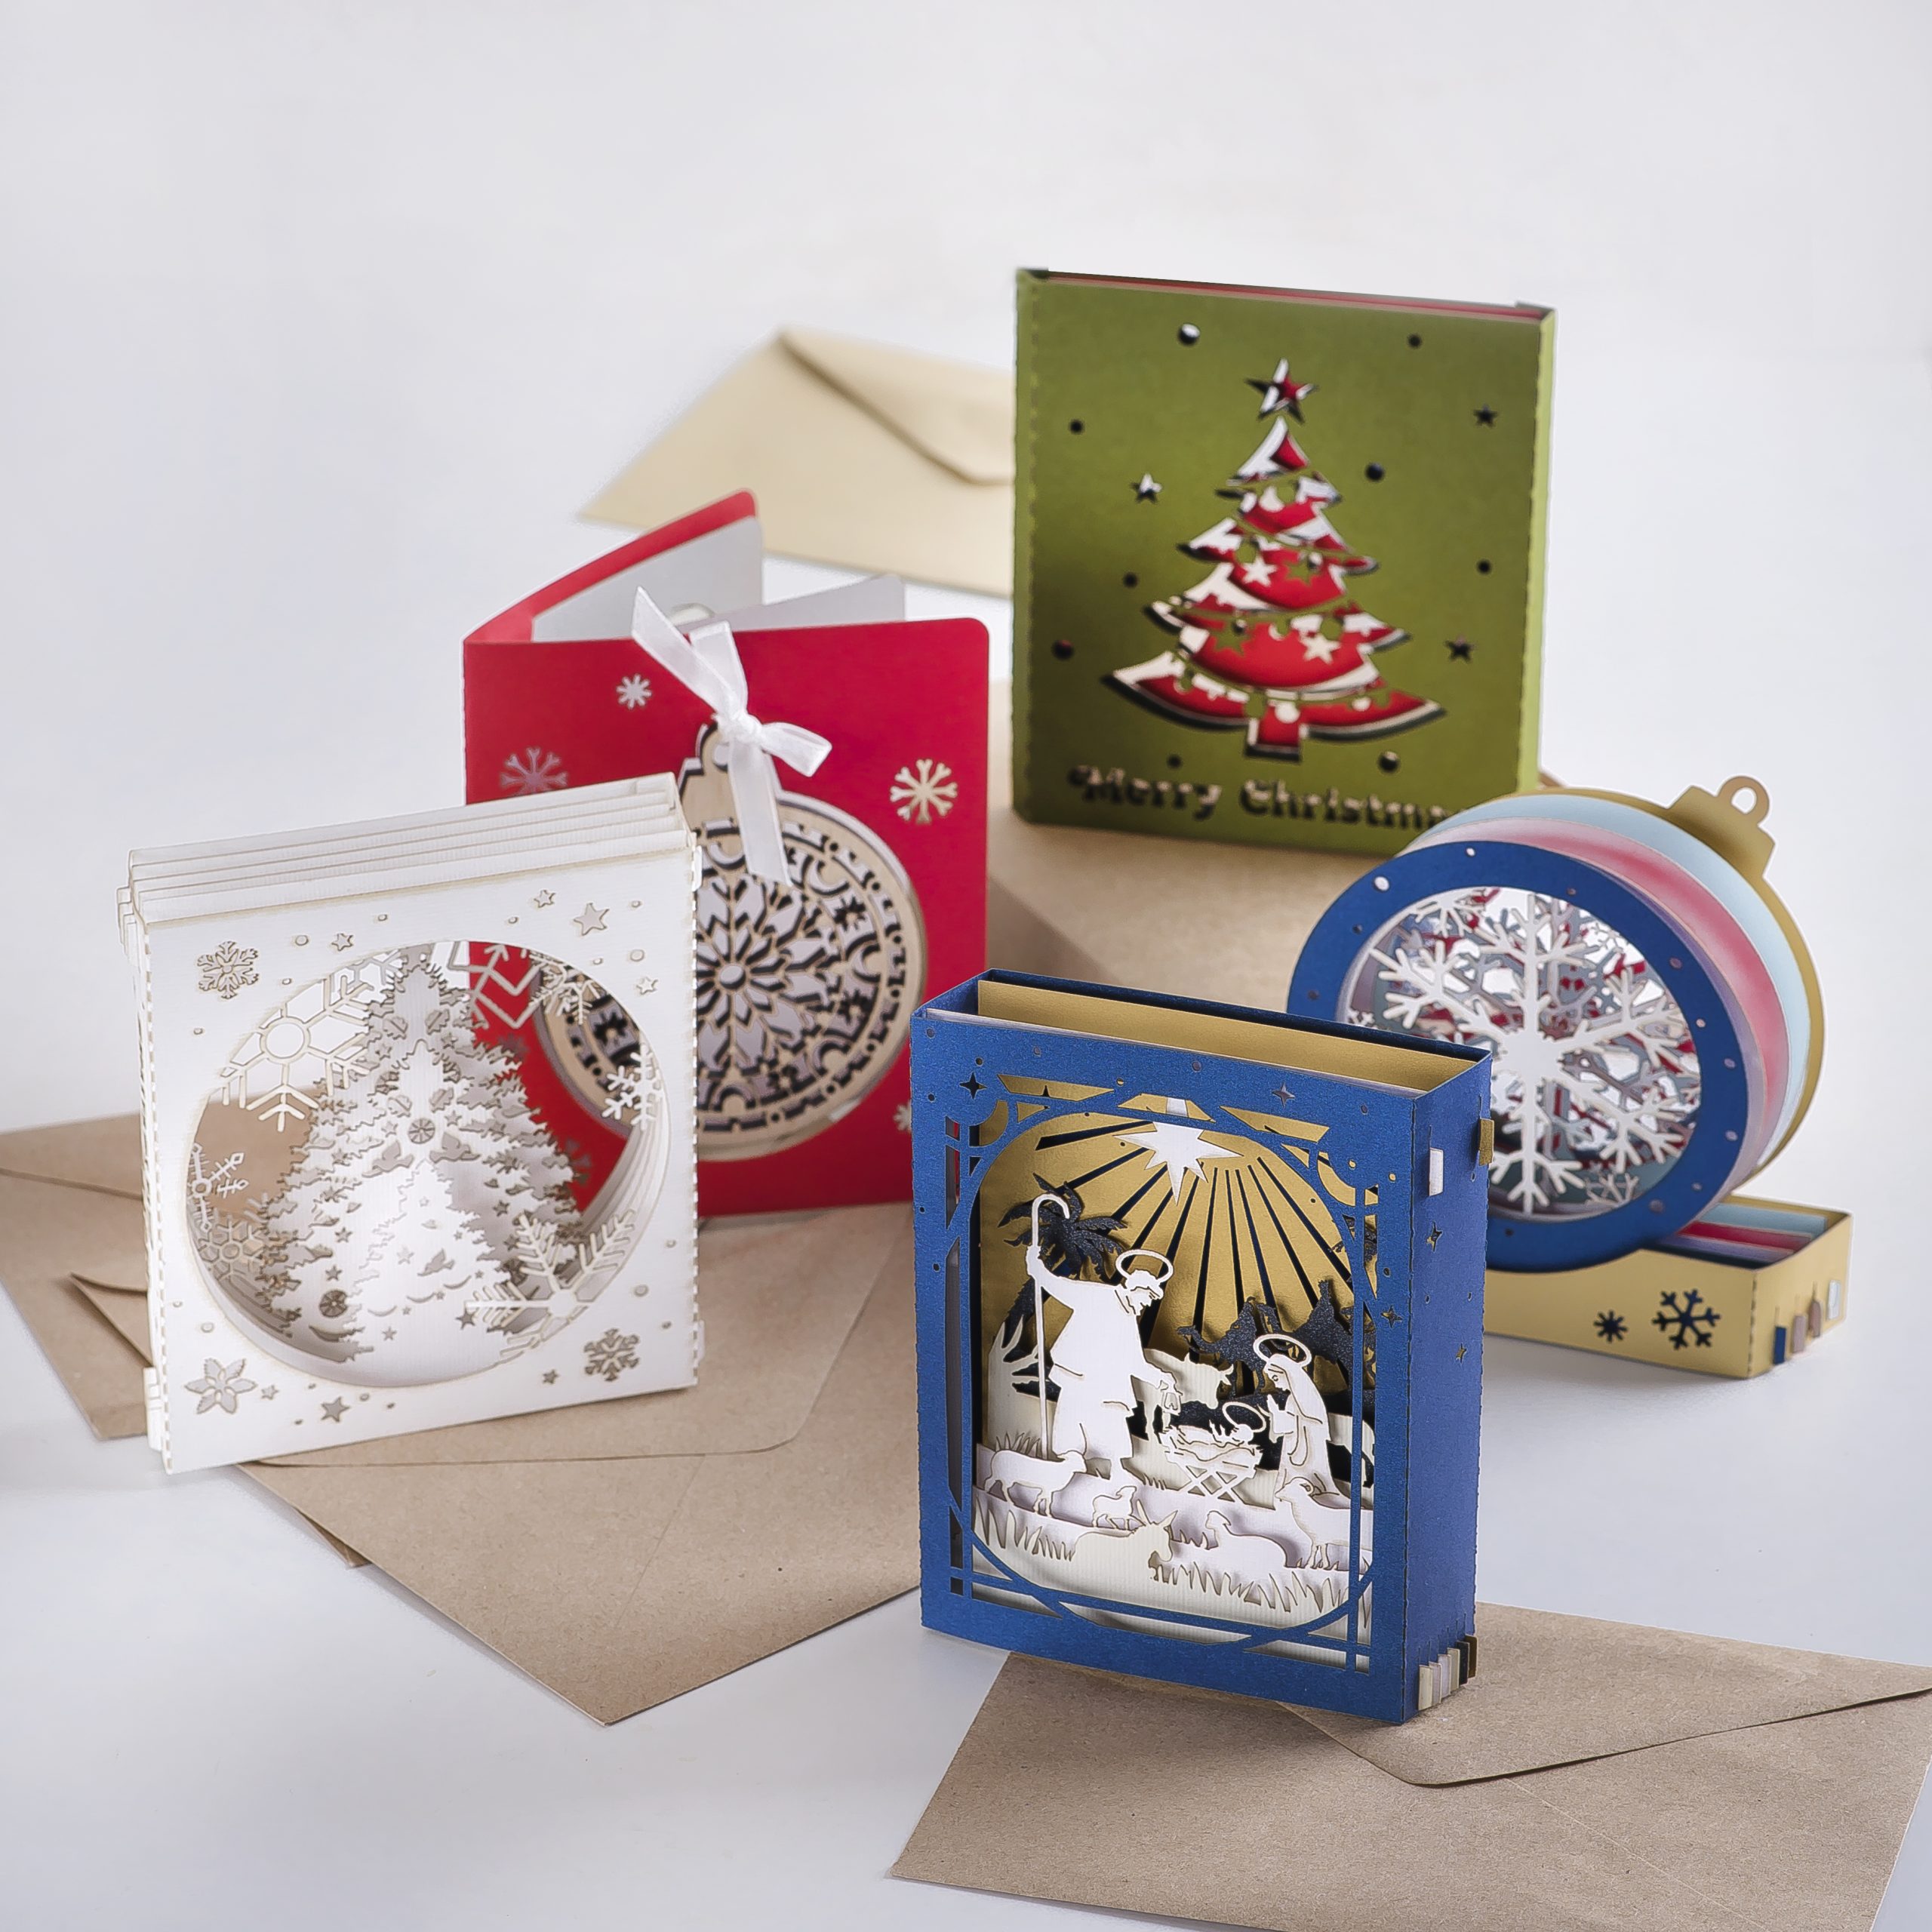 5 Pack 3D Christmas Pop Up Greeting Cards with Unique Snowflake Festive Design for Holiday